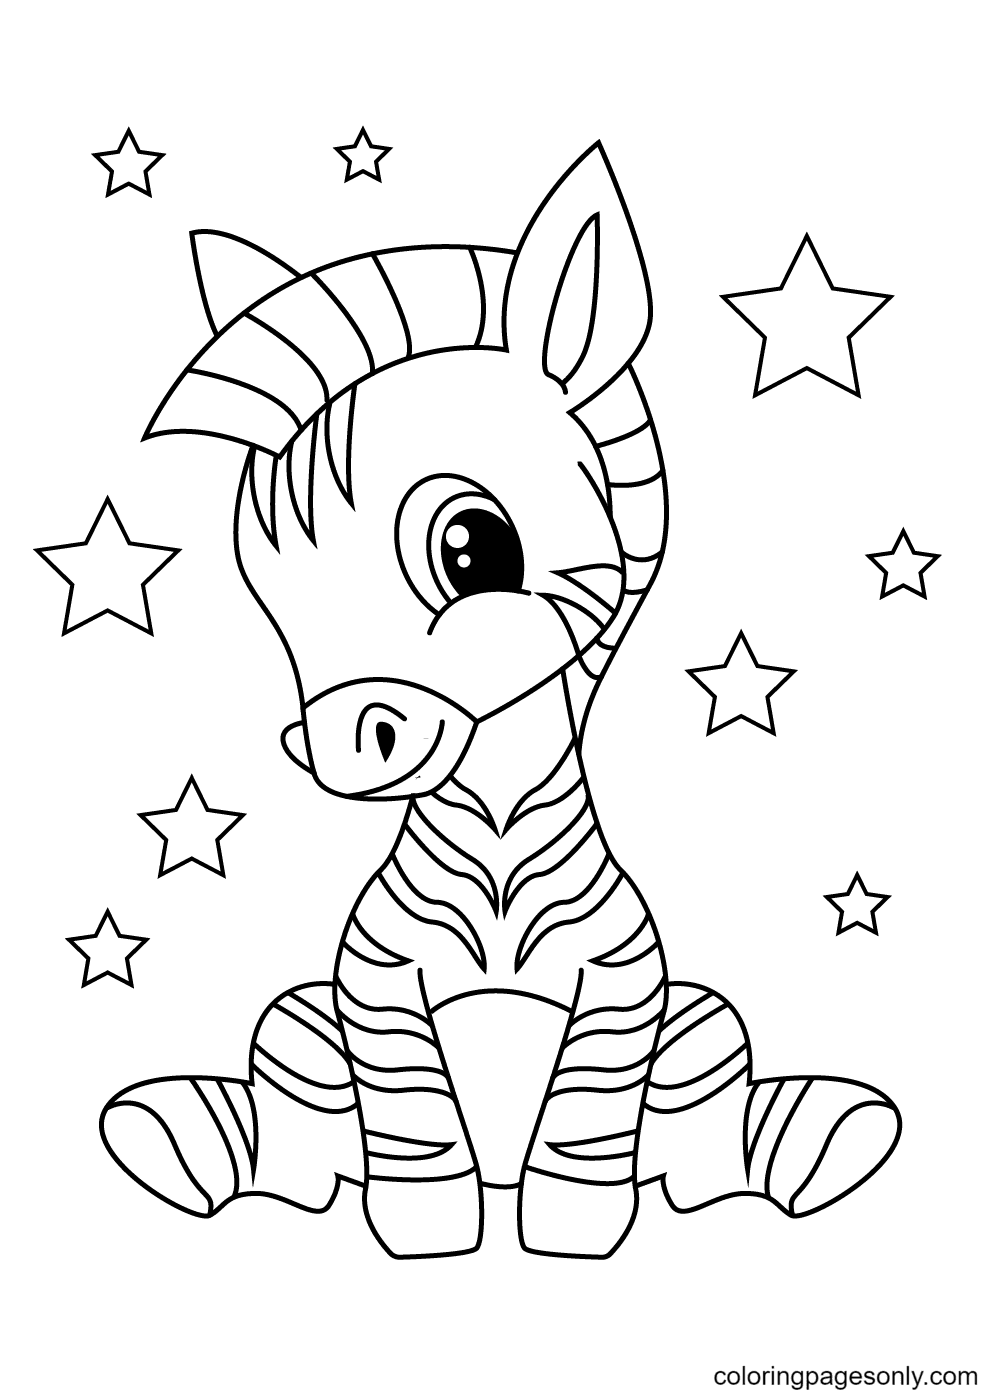 Adorable Zebra Coloring Pages